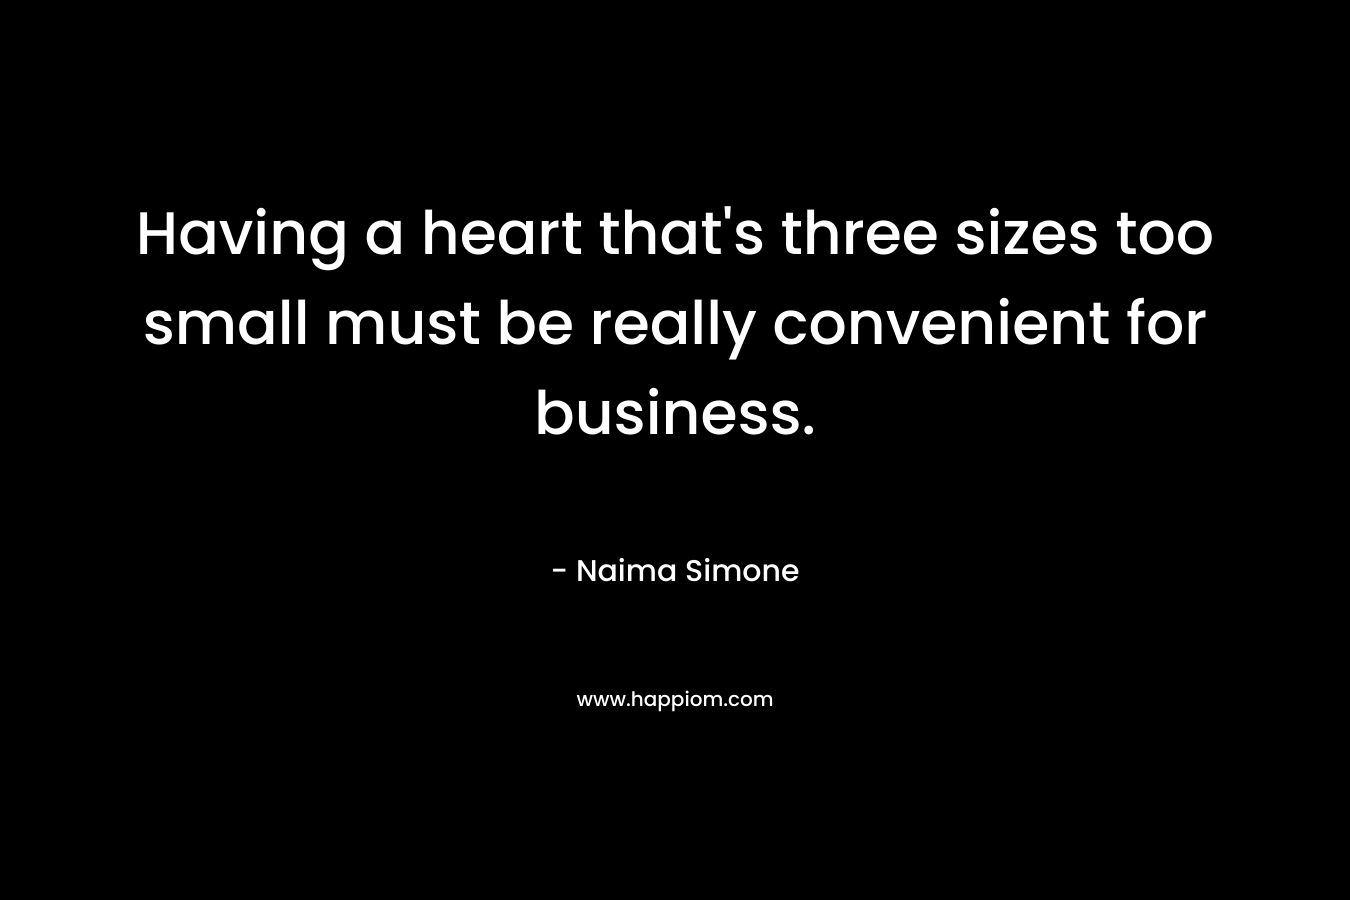 Having a heart that’s three sizes too small must be really convenient for business. – Naima Simone